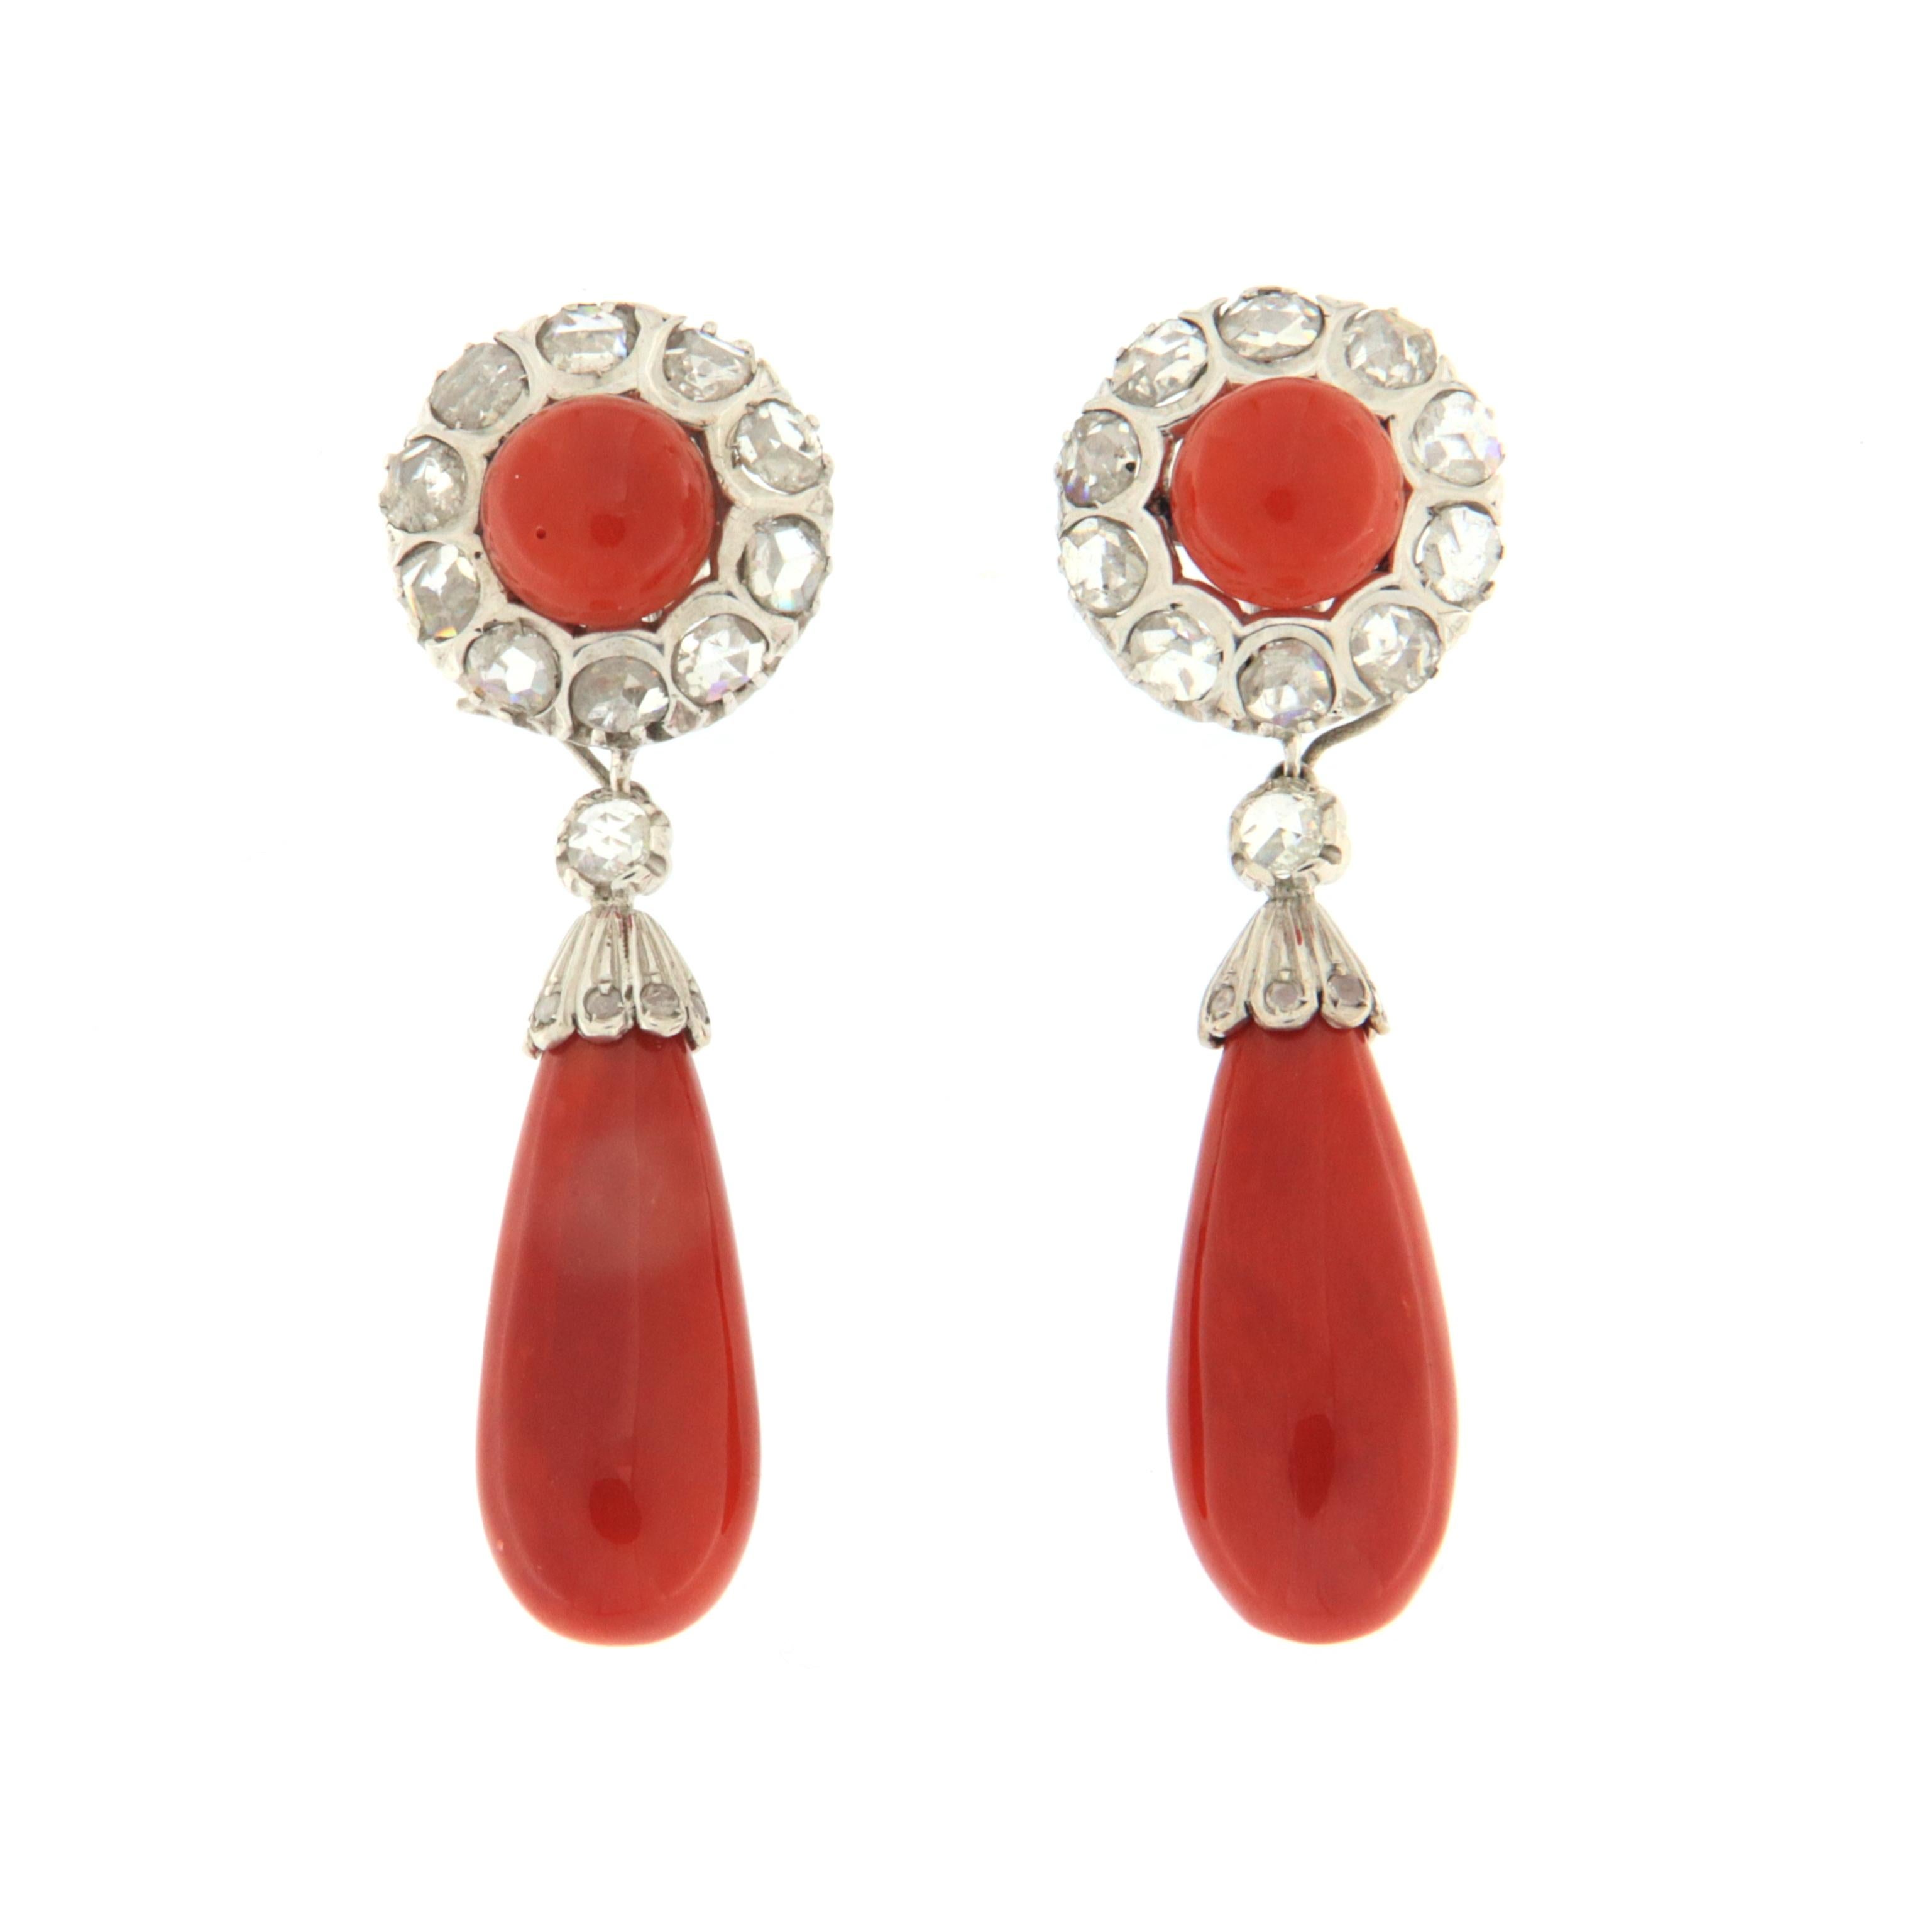 Beautiful earrings 14 karat white gold mounted with Sardinian coral and rose diamonds.
Earrings created by craftsmen.
It's possibile wear the earrings without the lower part
(check photos)

Earrings total weight 16.20 grams
Only Coral weight 6.60